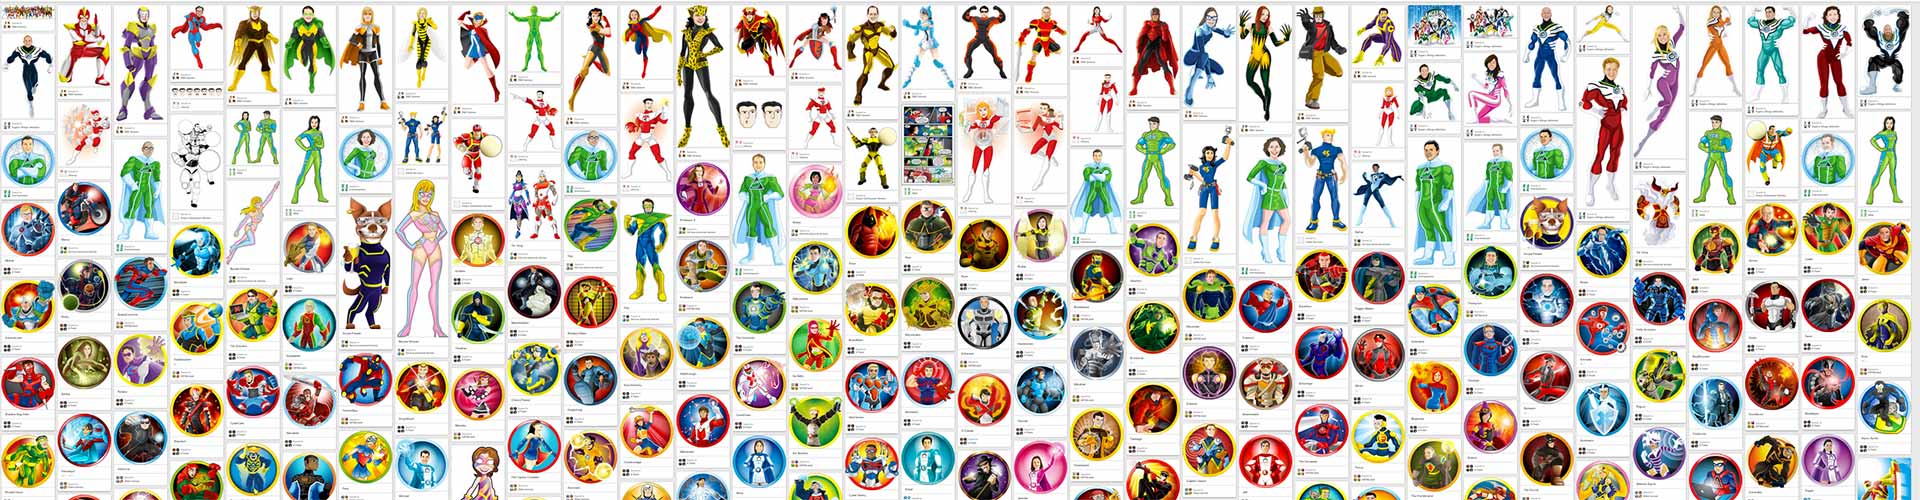 The superheroes collage background